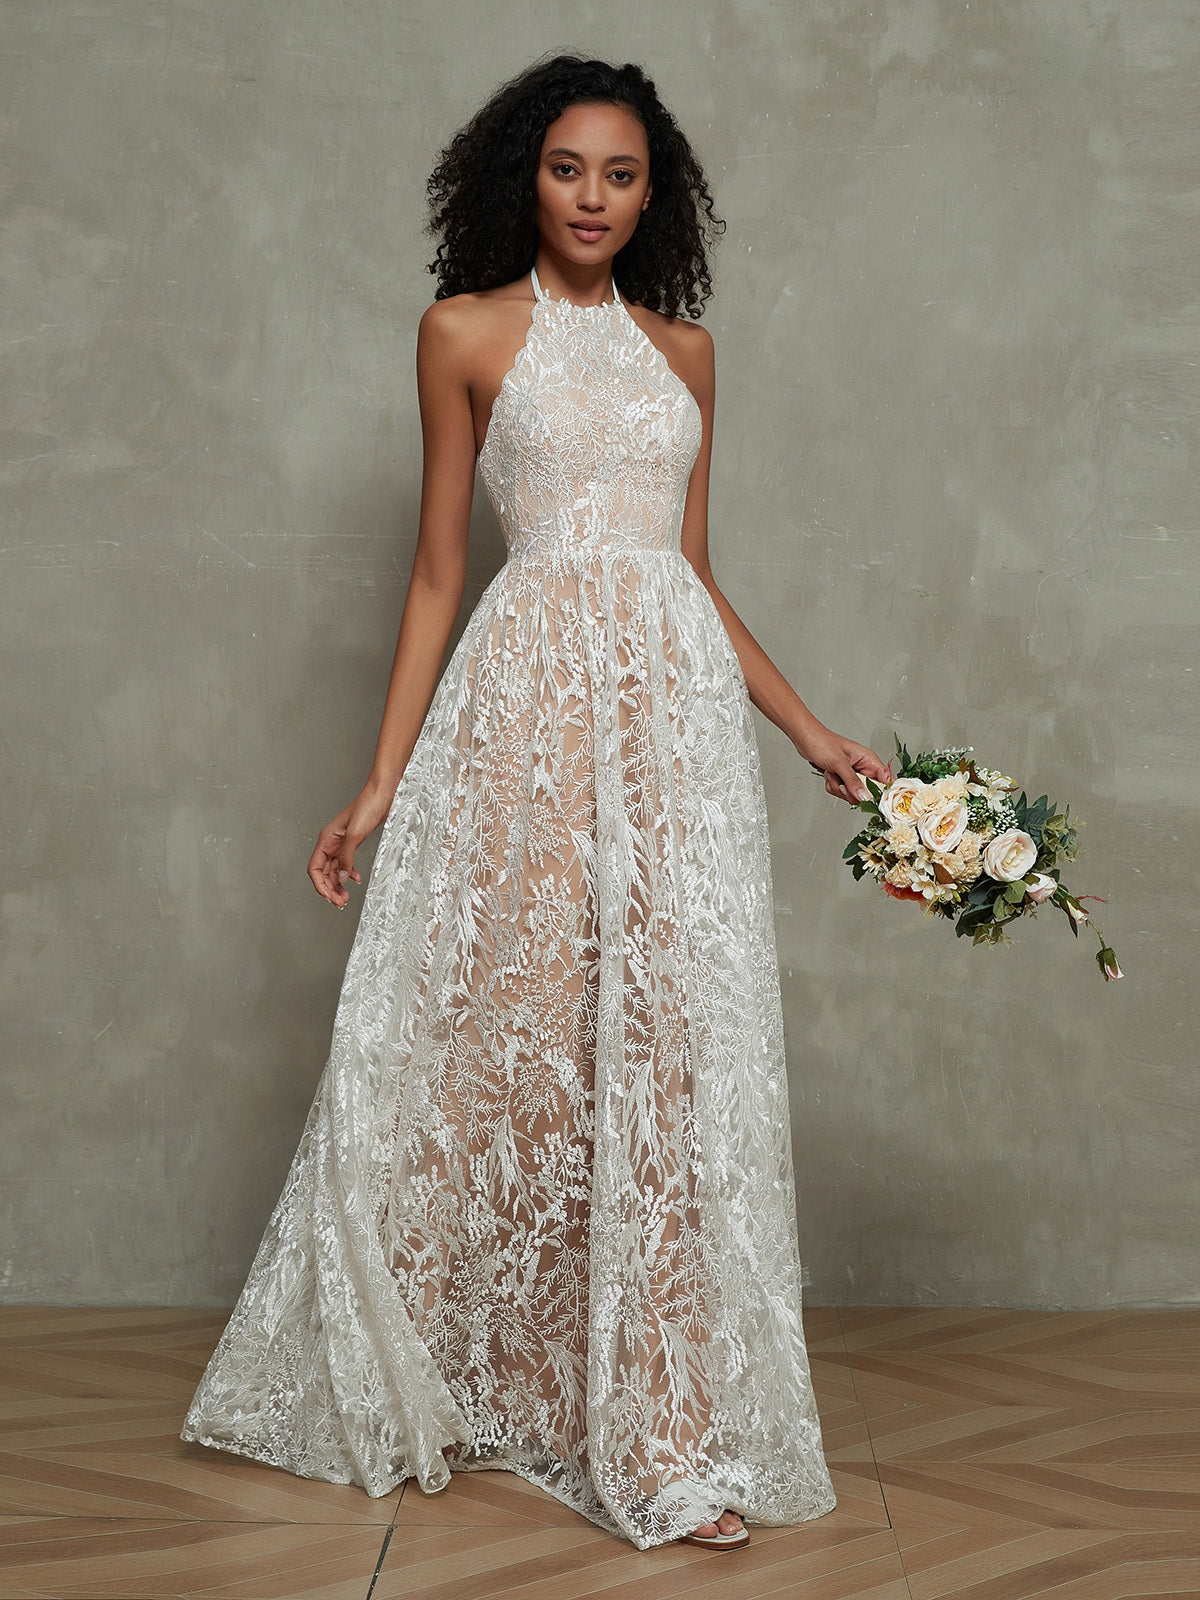 24 Elegantly Tailored Wedding Dresses for Pear Shaped Body